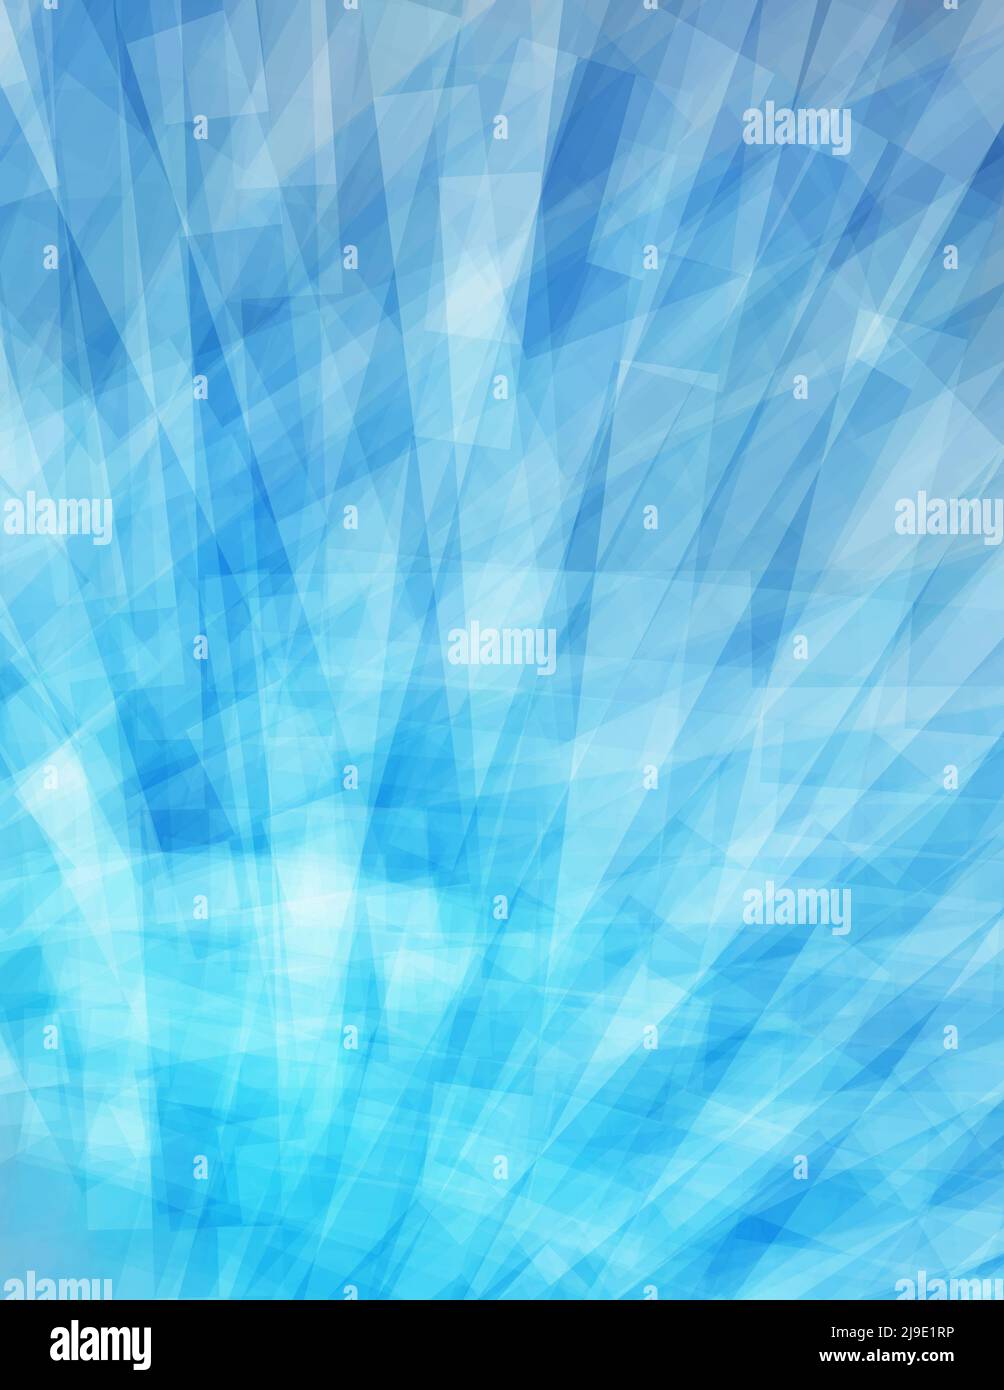 Abstract chaotic blue artistic textured background. Vertical vector graphic pattern Stock Vector